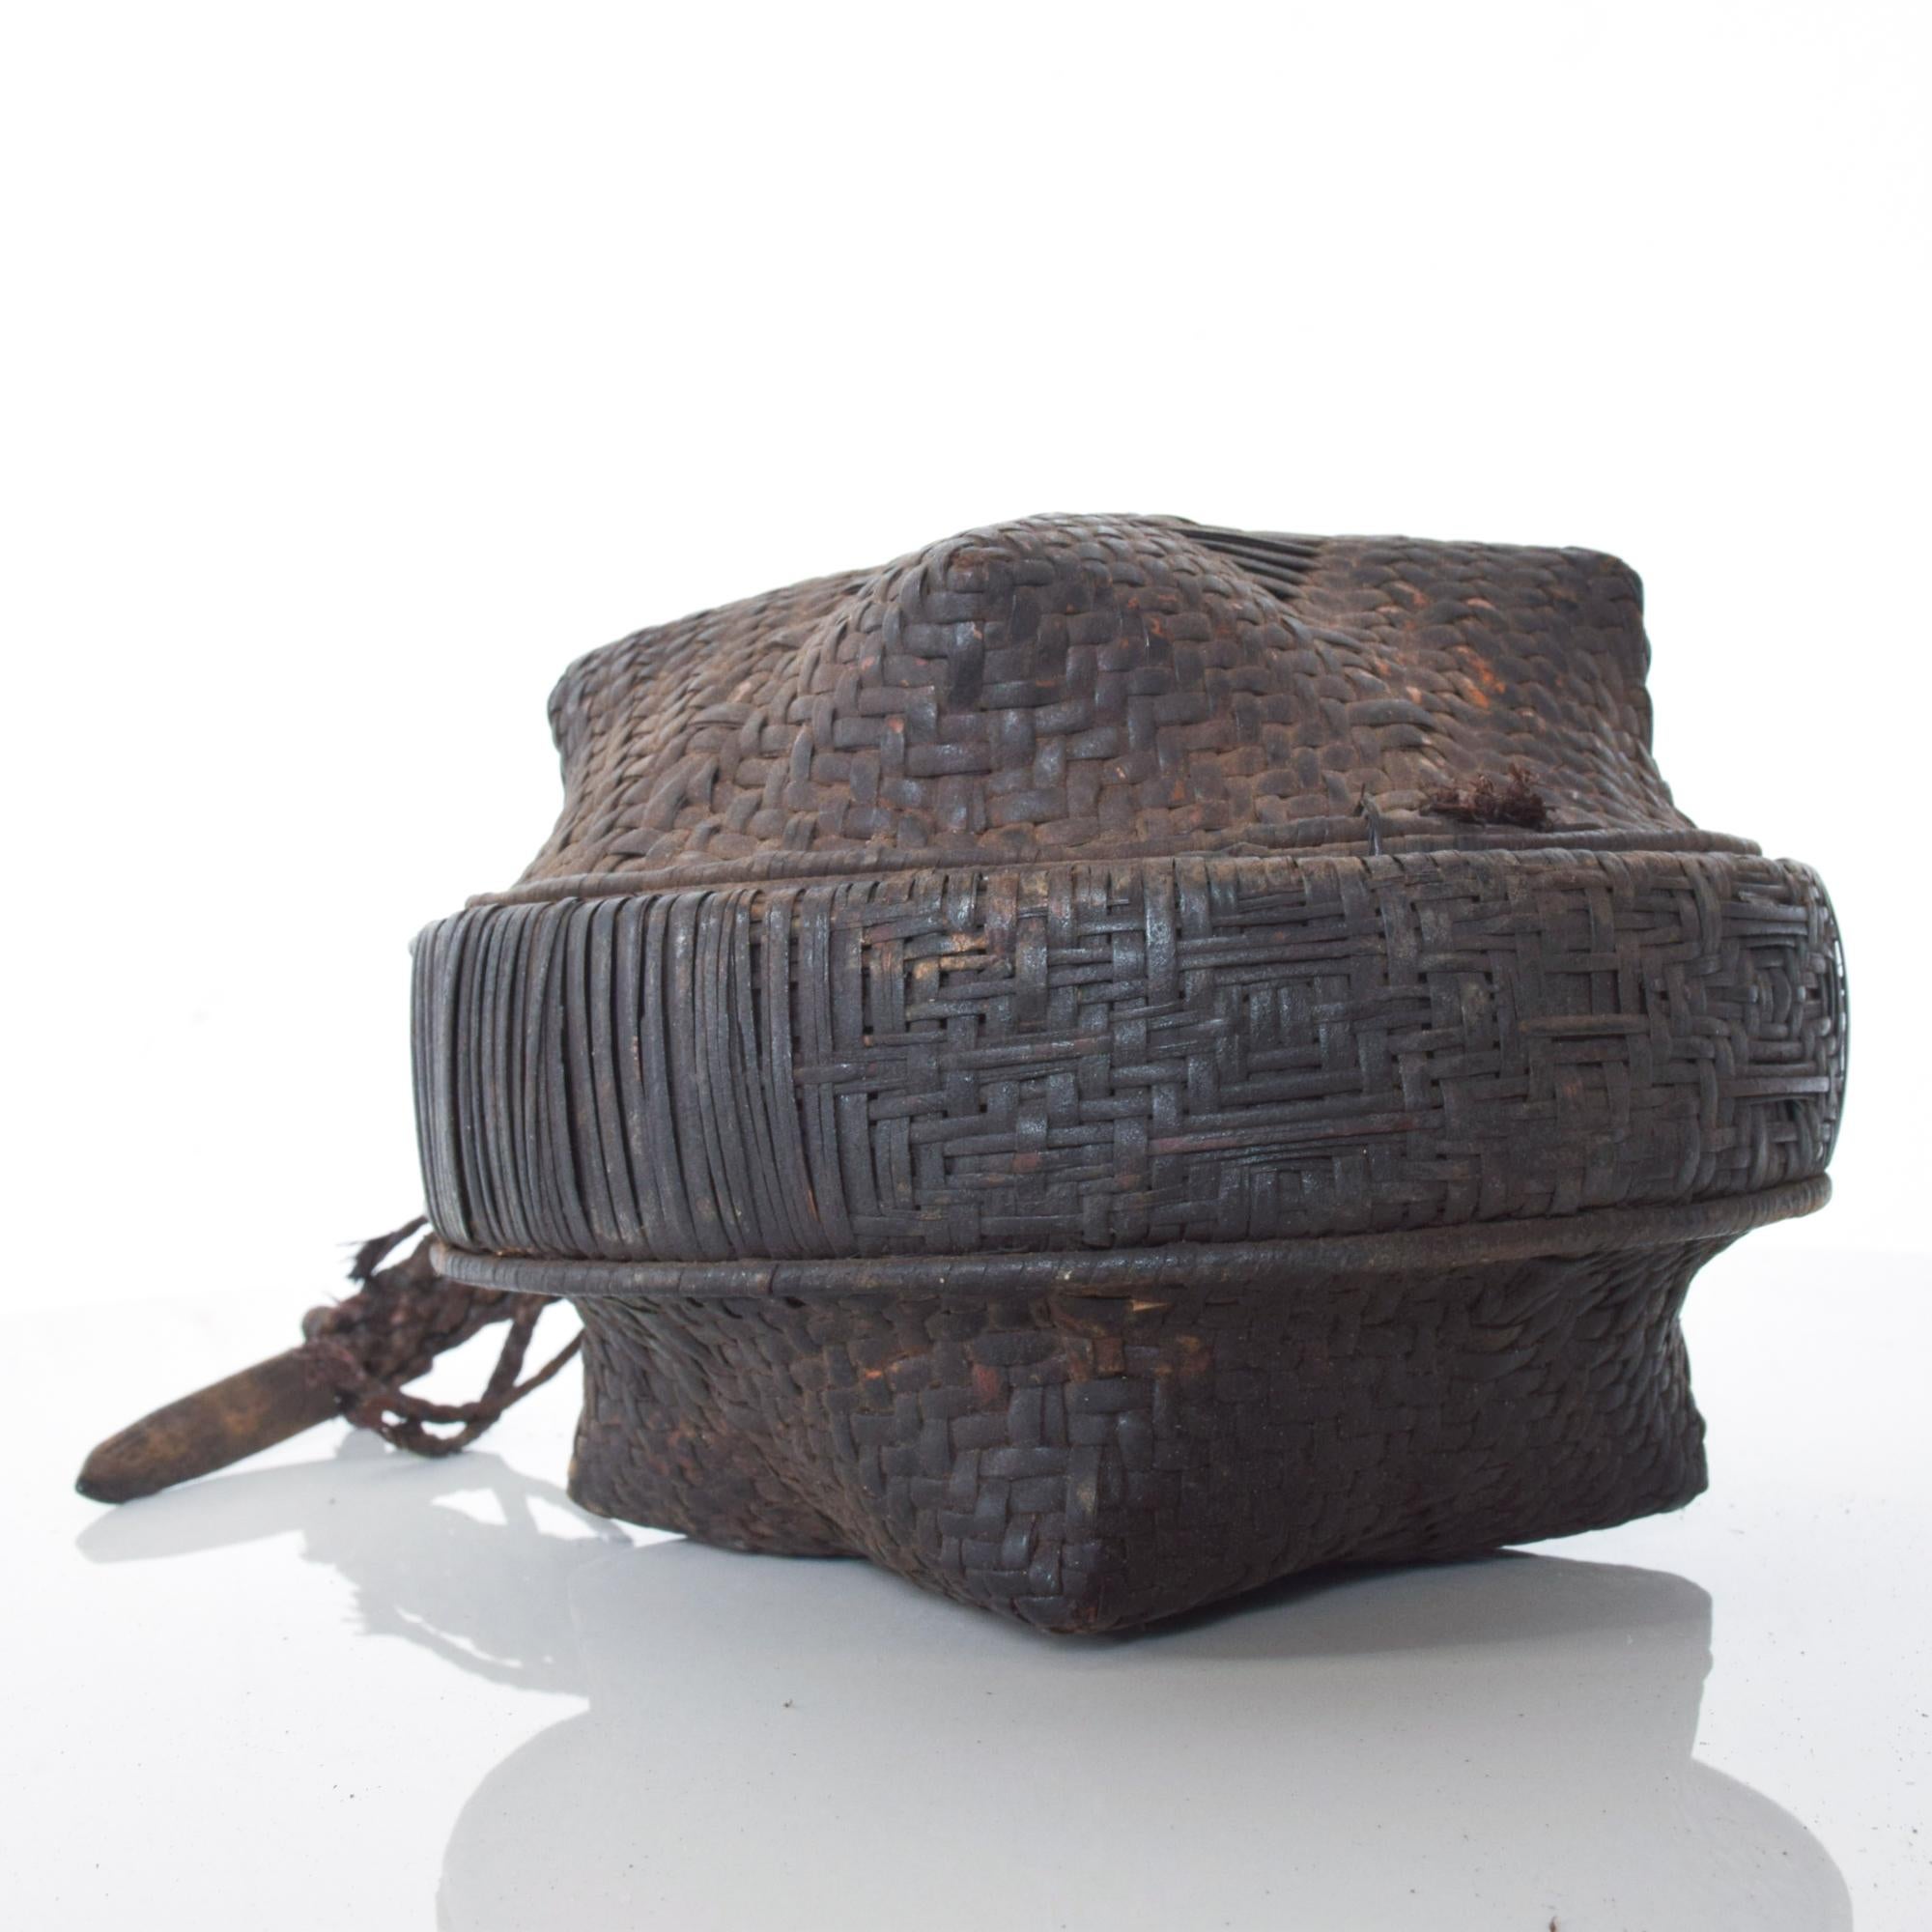 Mid-20th Century Asian Bamboo Antique Rice Basket Set Lidded Food Carry Bowls Small and Large